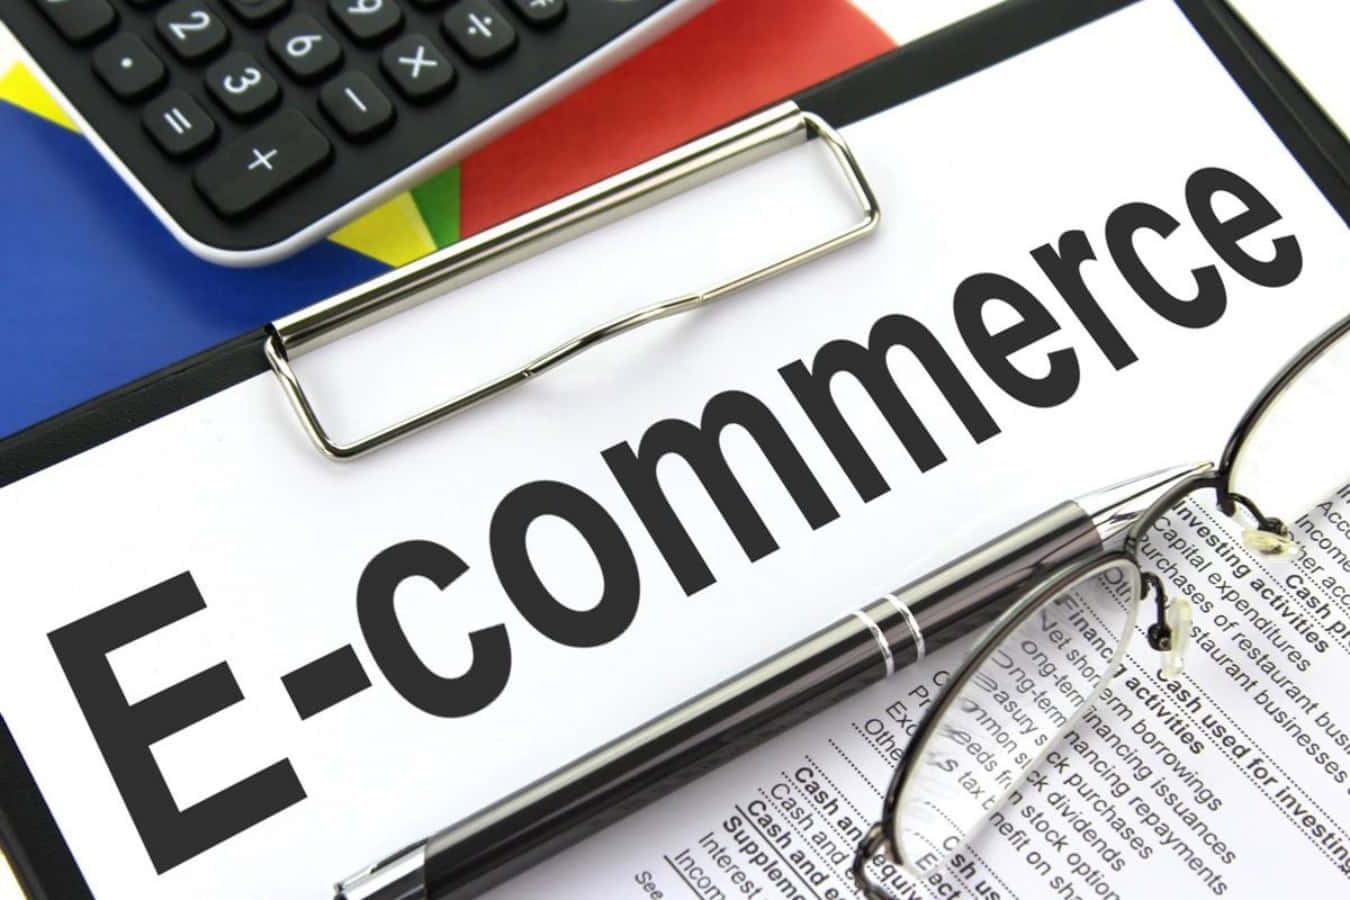 E-commerce - A Business That Is A Good Investment